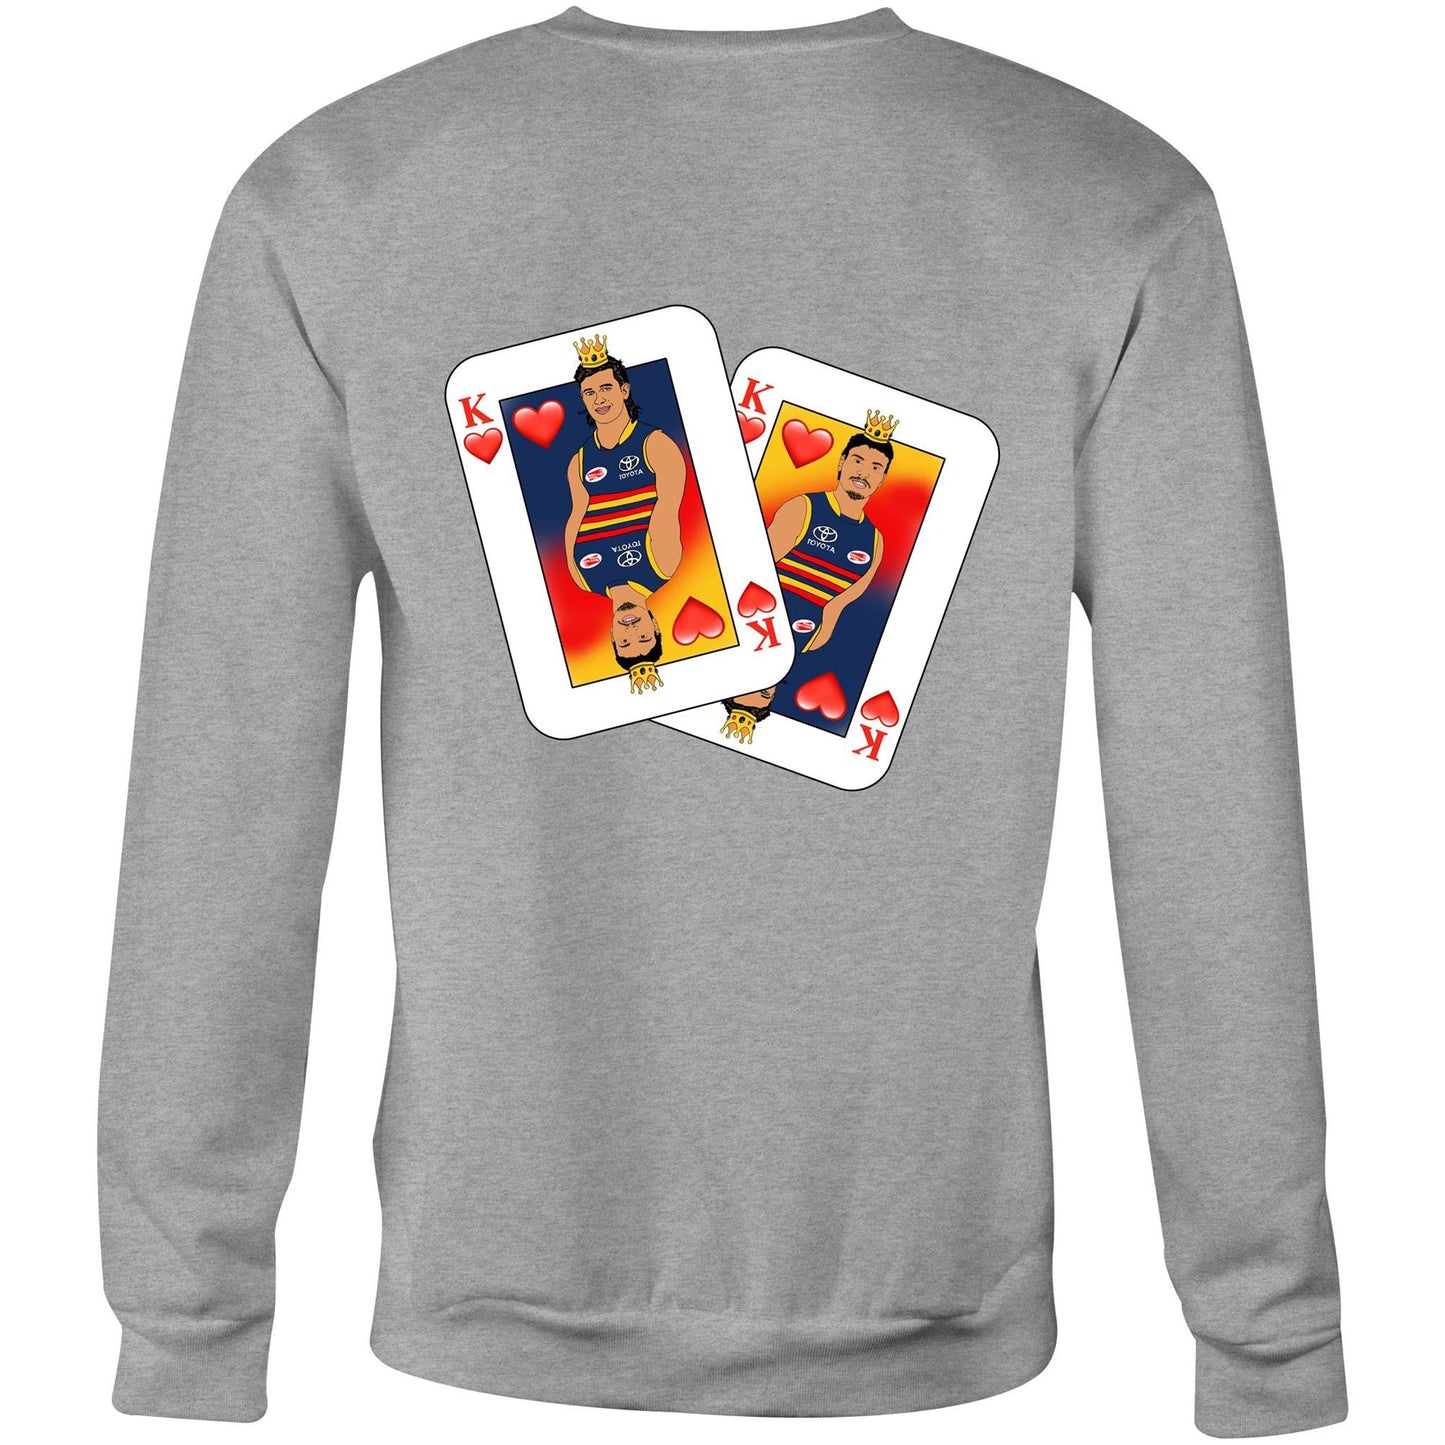 King of Hearts - Sweater